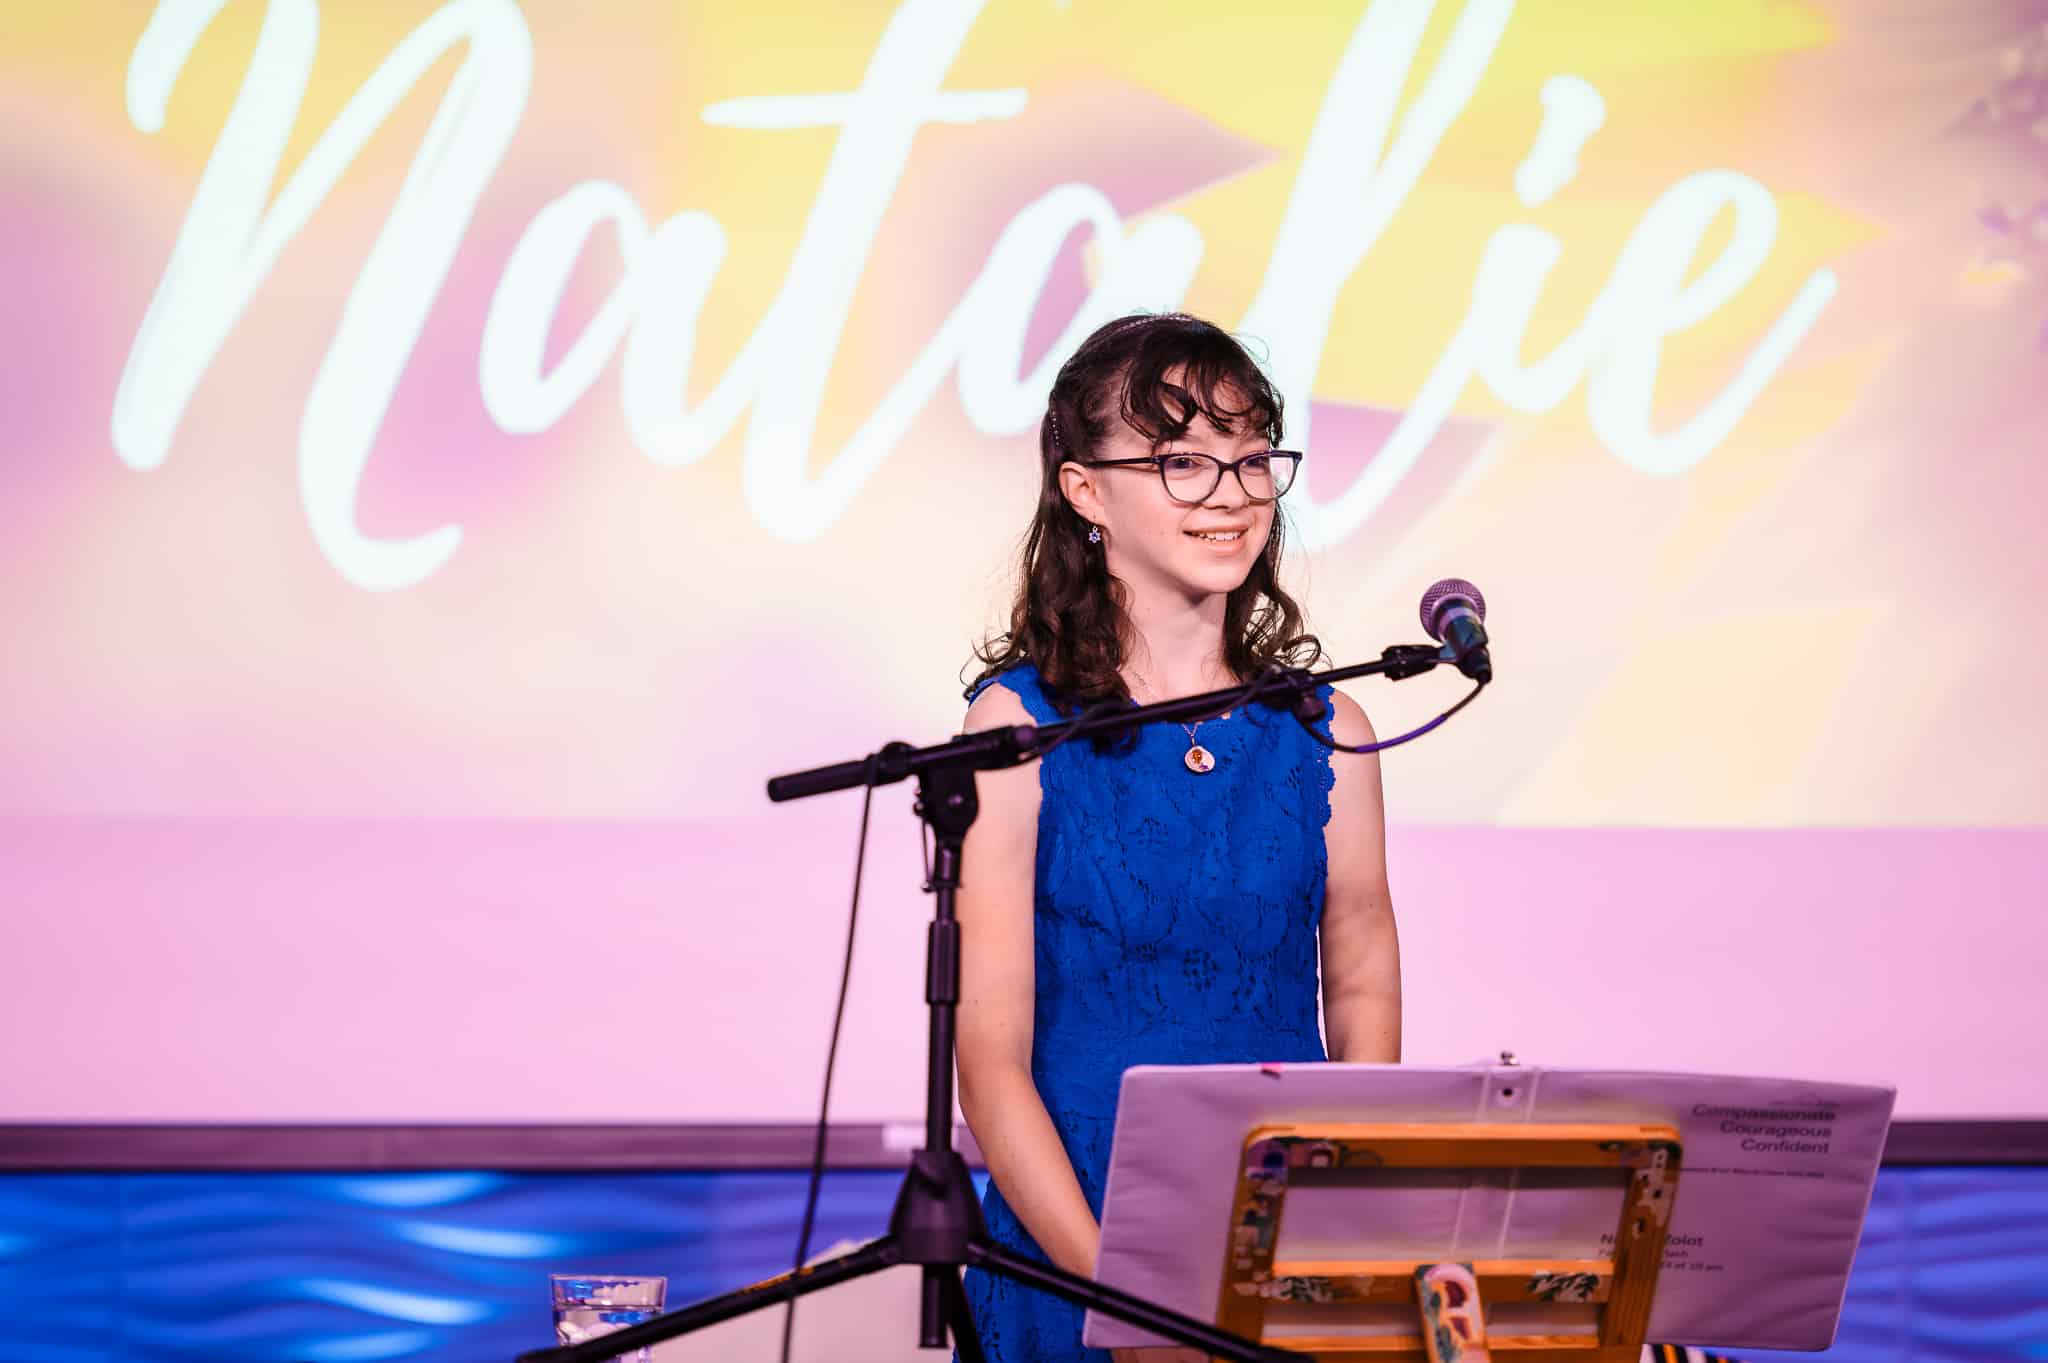 A young woman at her mitzvah with a project screen showing her name, "Natalie."